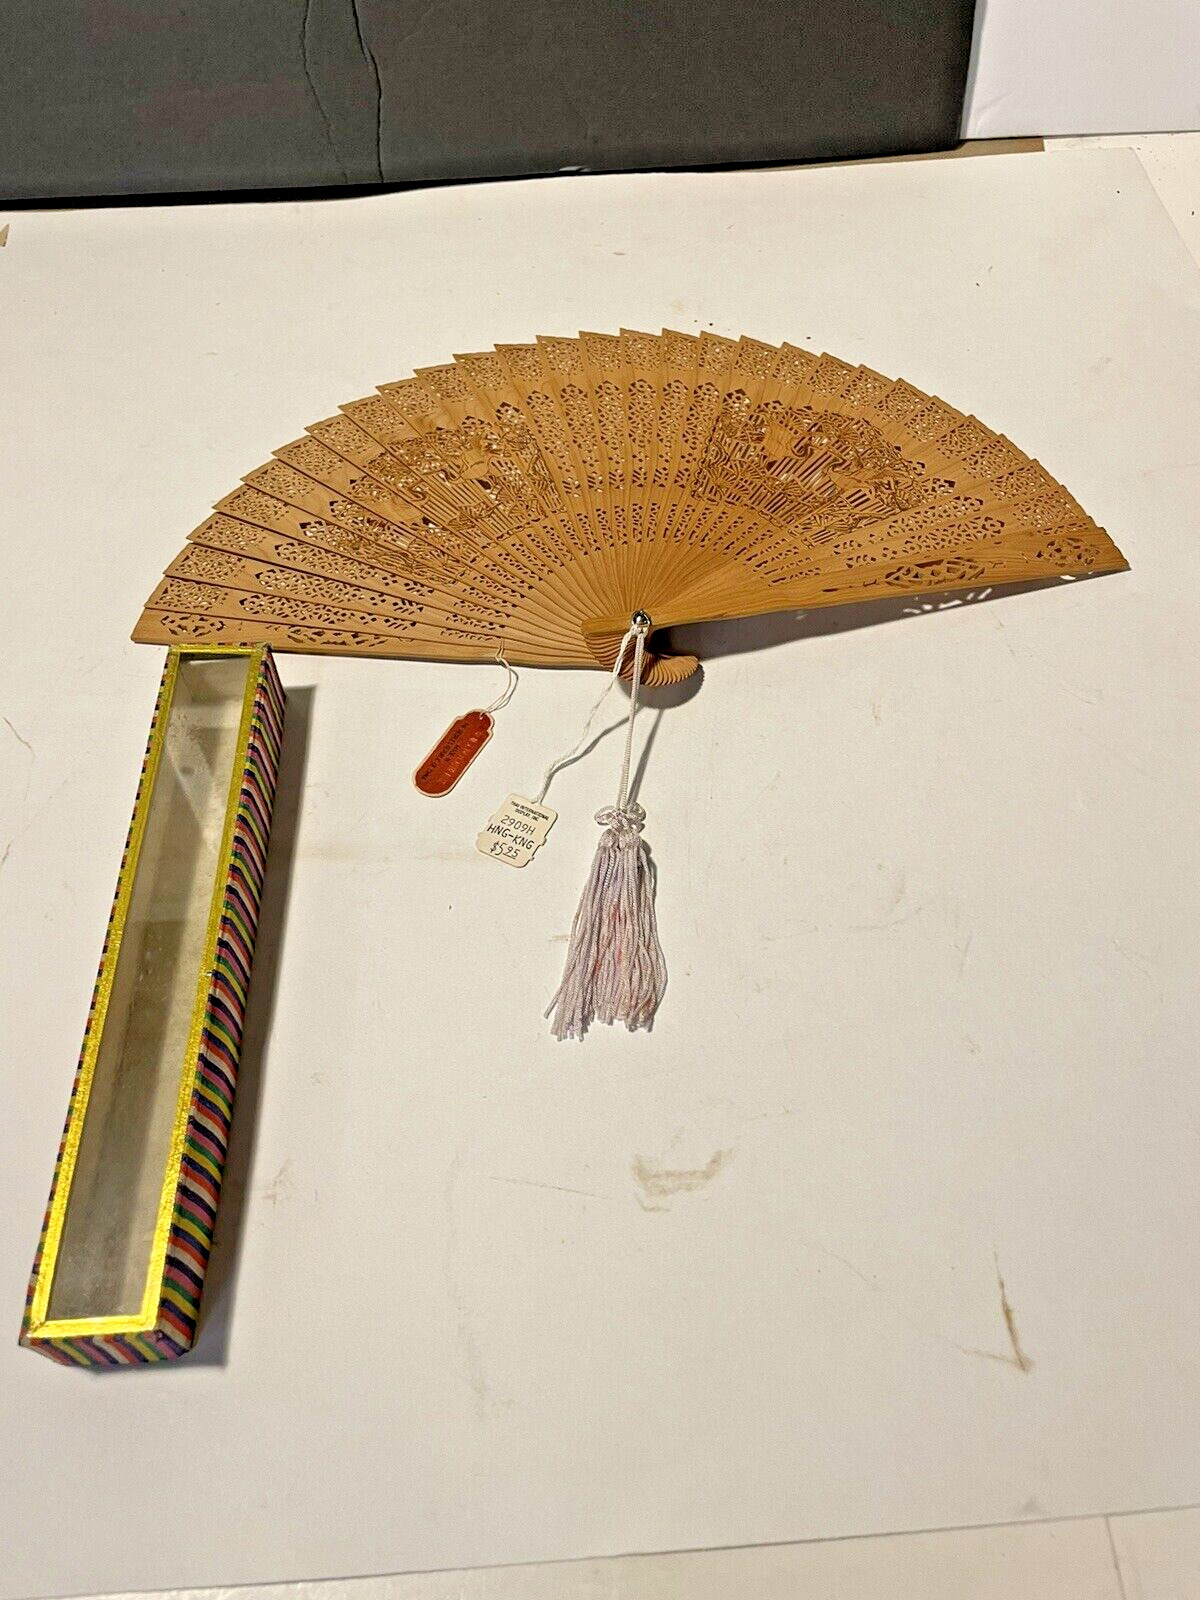 VTG Peoples Republic Of China Vintage Wooden Hand Fan In Original Box With Tags